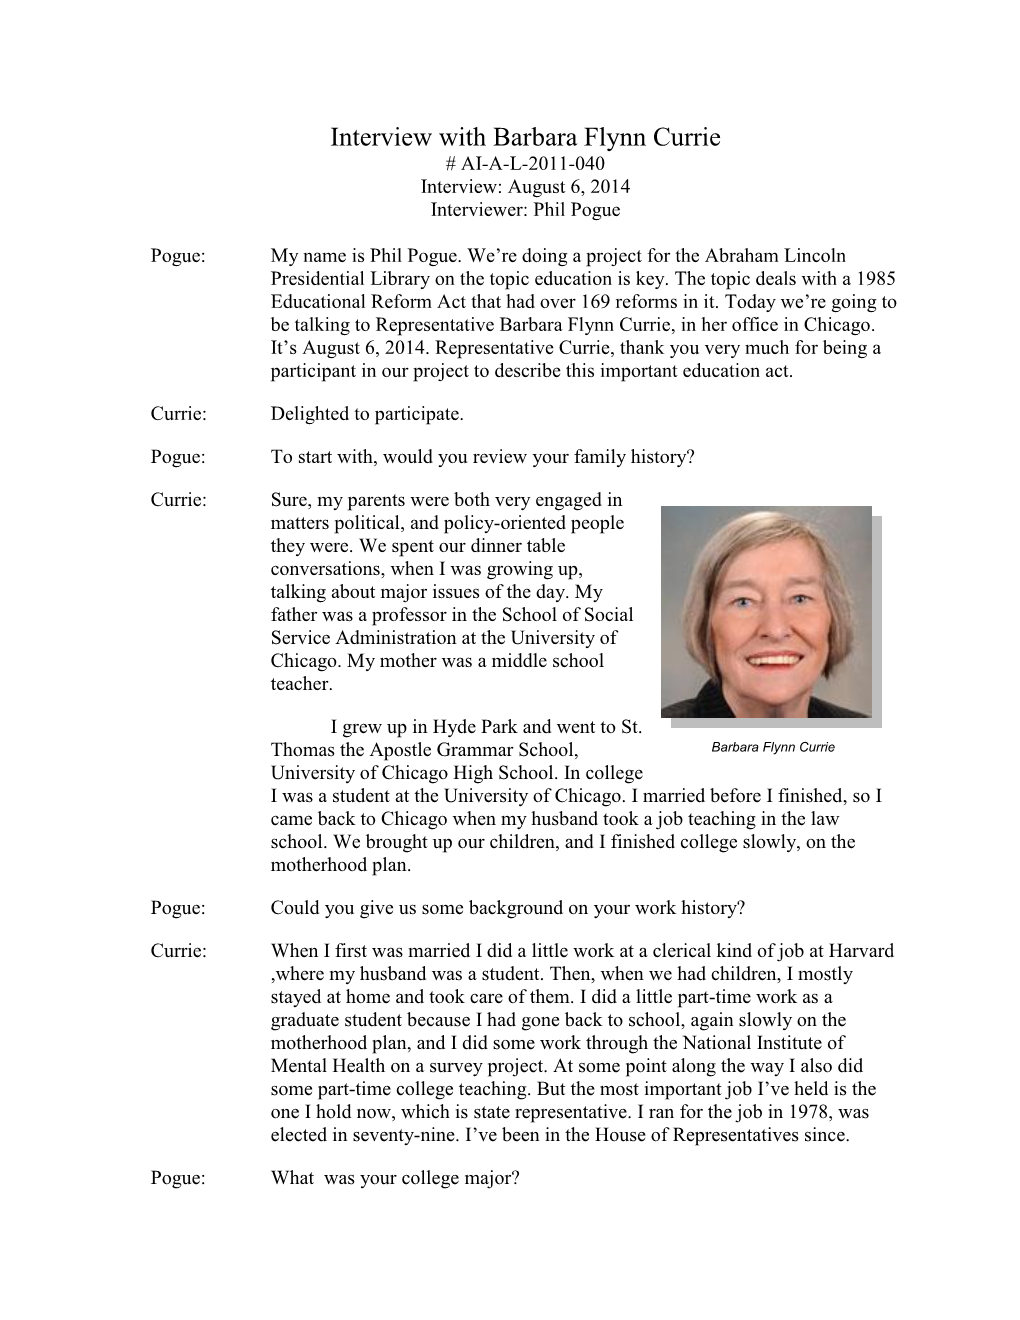 Interview with Barbara Flynn Currie # AI-A-L-2011-040 Interview: August 6, 2014 Interviewer: Phil Pogue